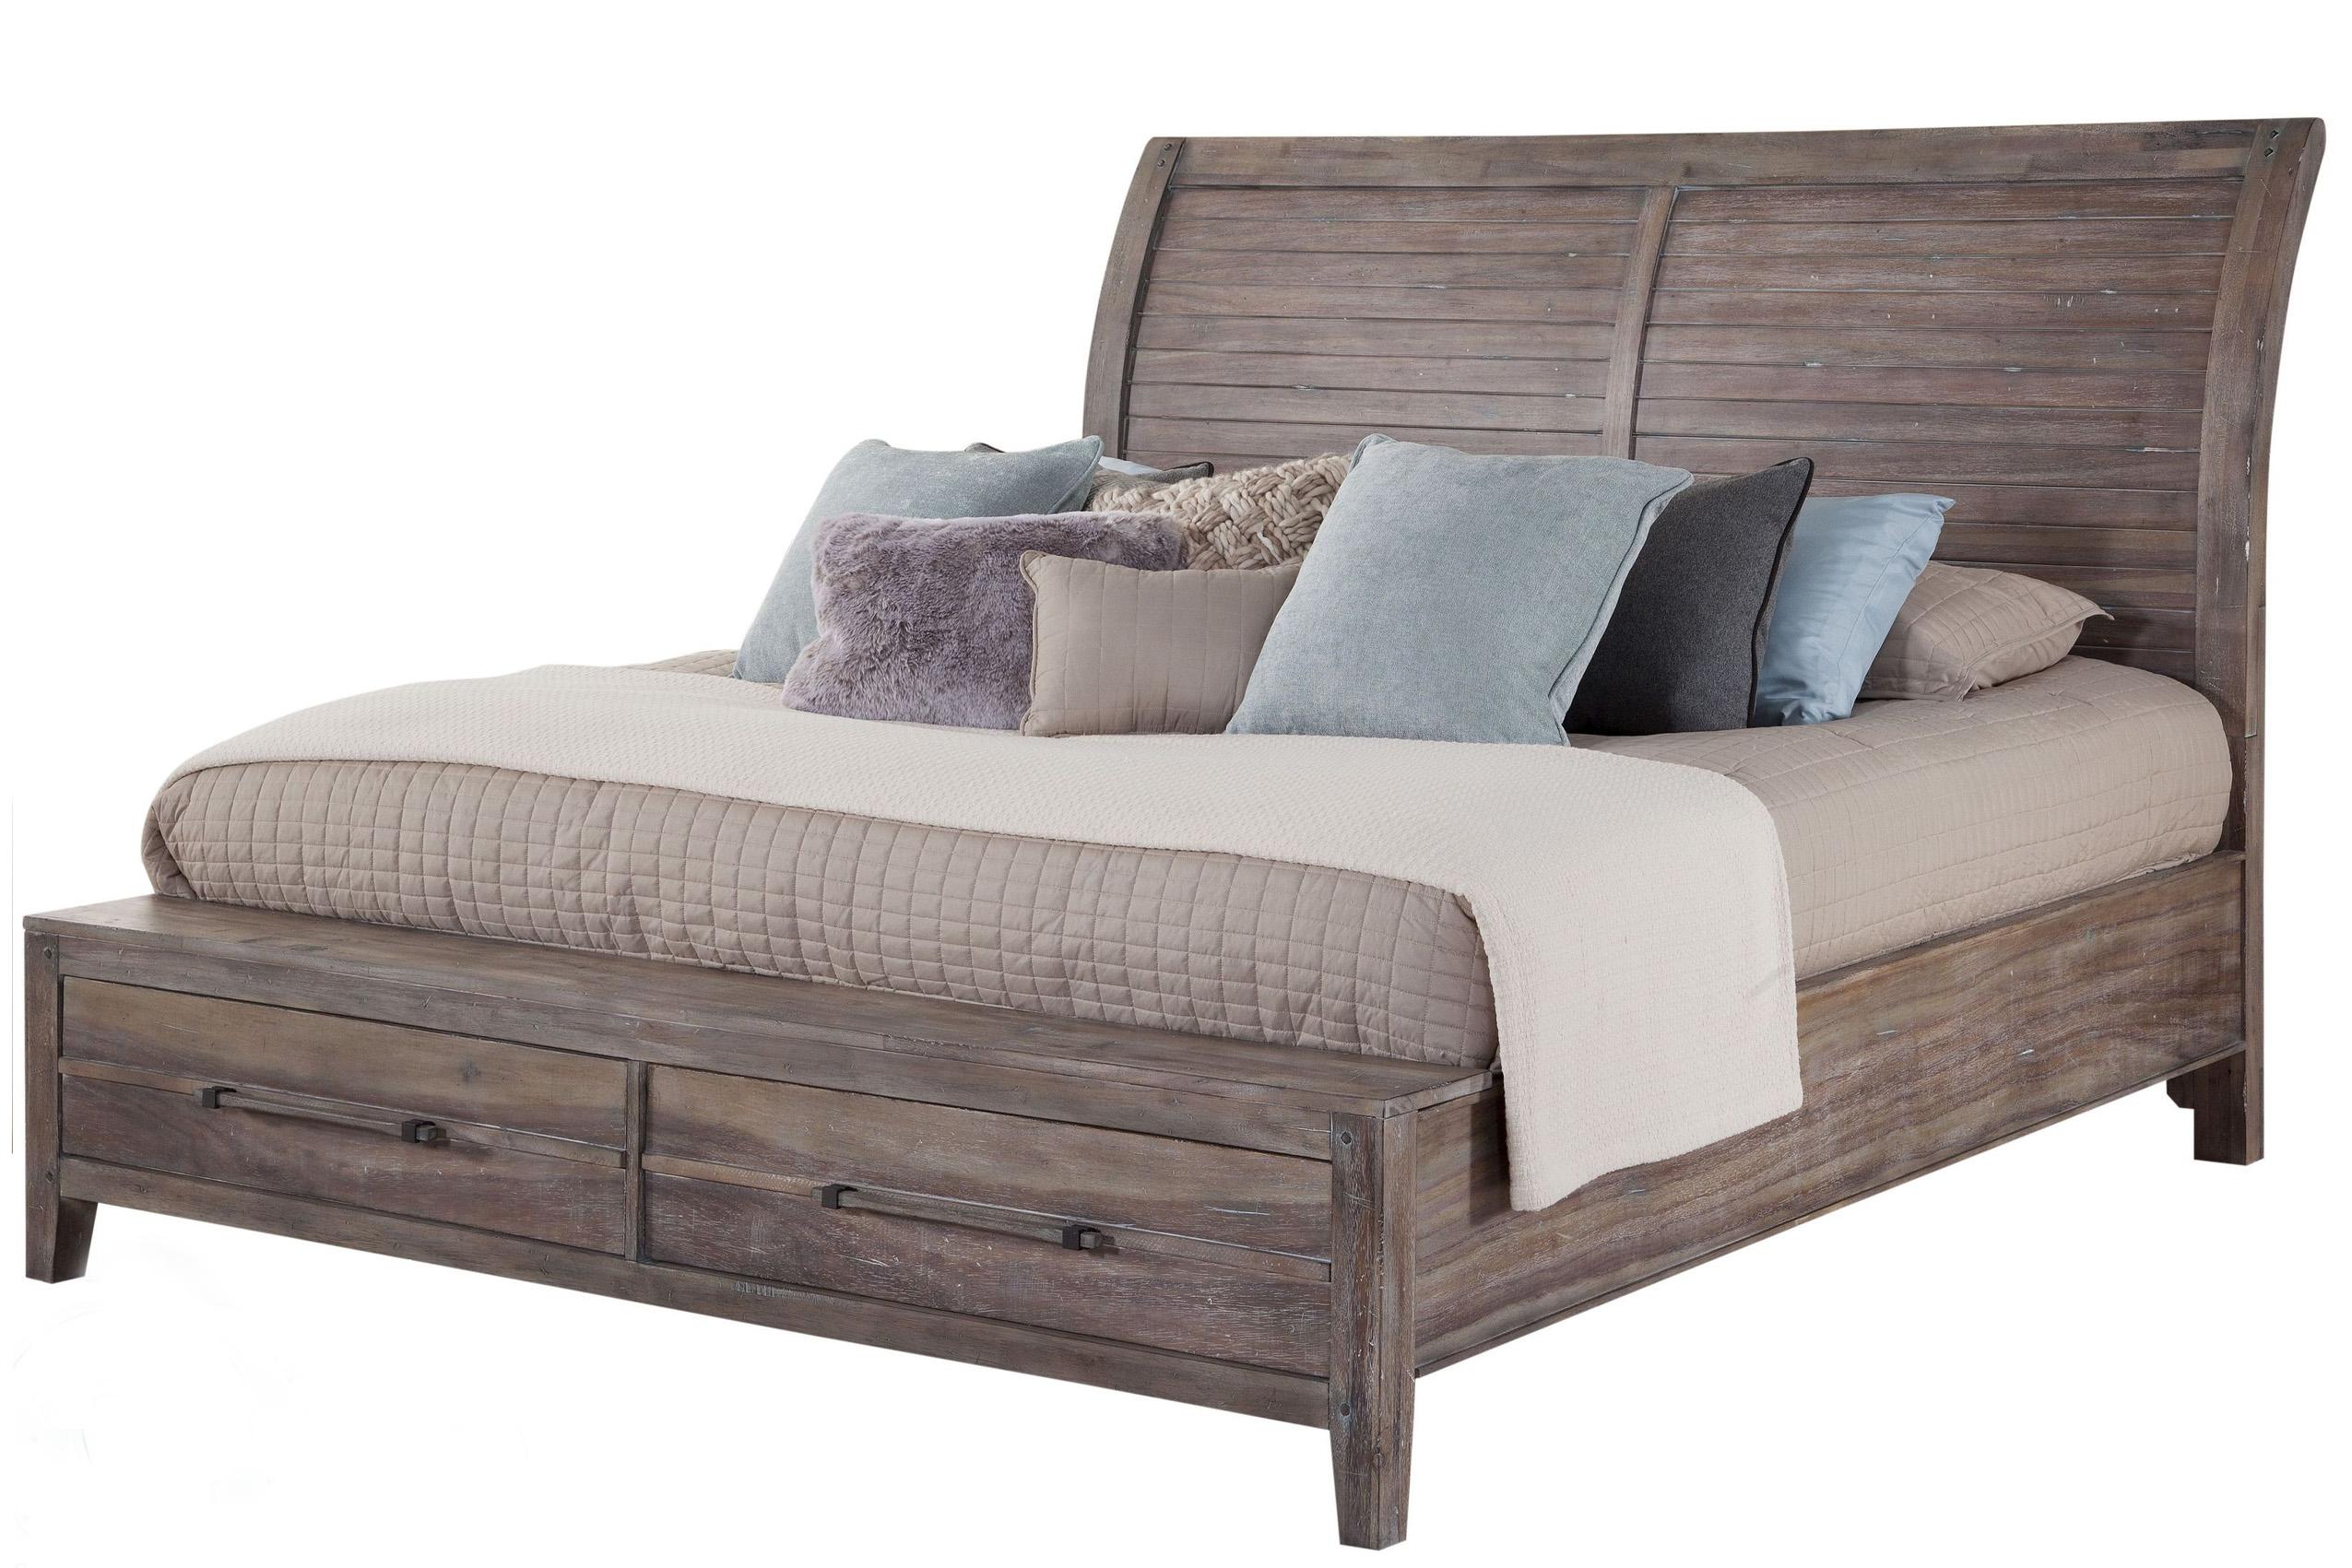 Classic, Traditional Sleigh Bed AURORA 2800-66SLES 2800-66SLST in Driftwood, Gray 